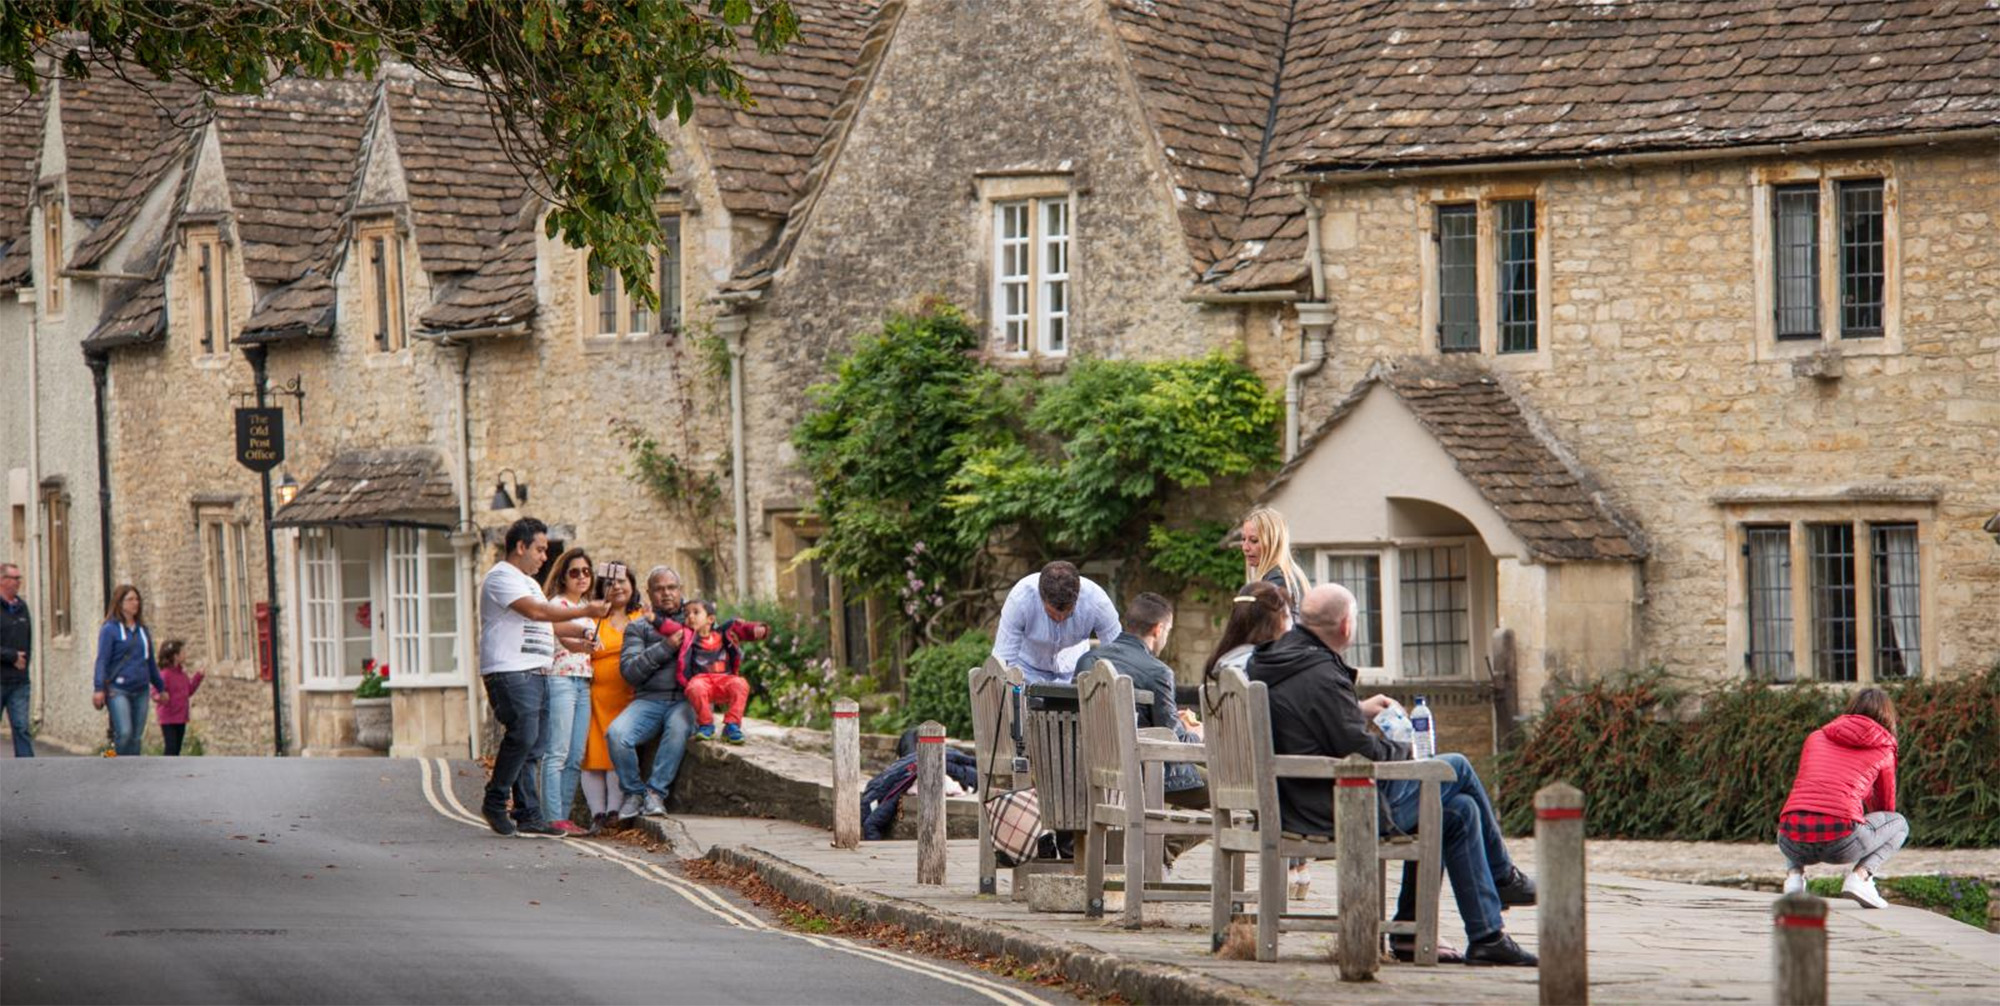 People sitting on benches with stone cottages in the background